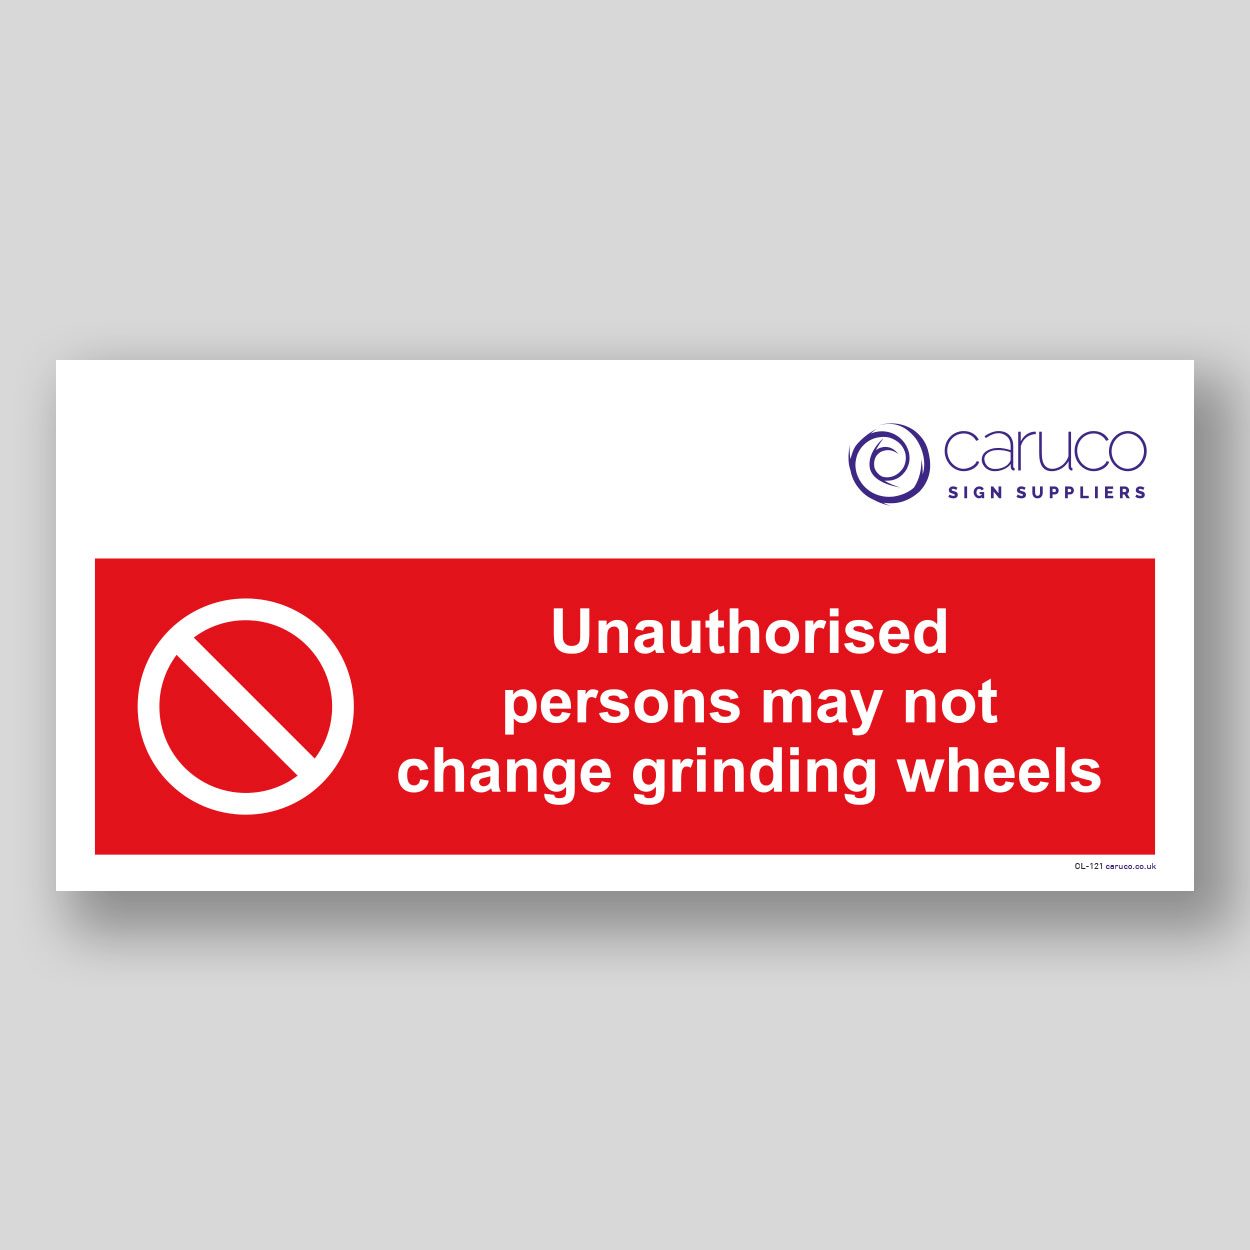 CL-121 Unauthorised person may not change grinding wheels